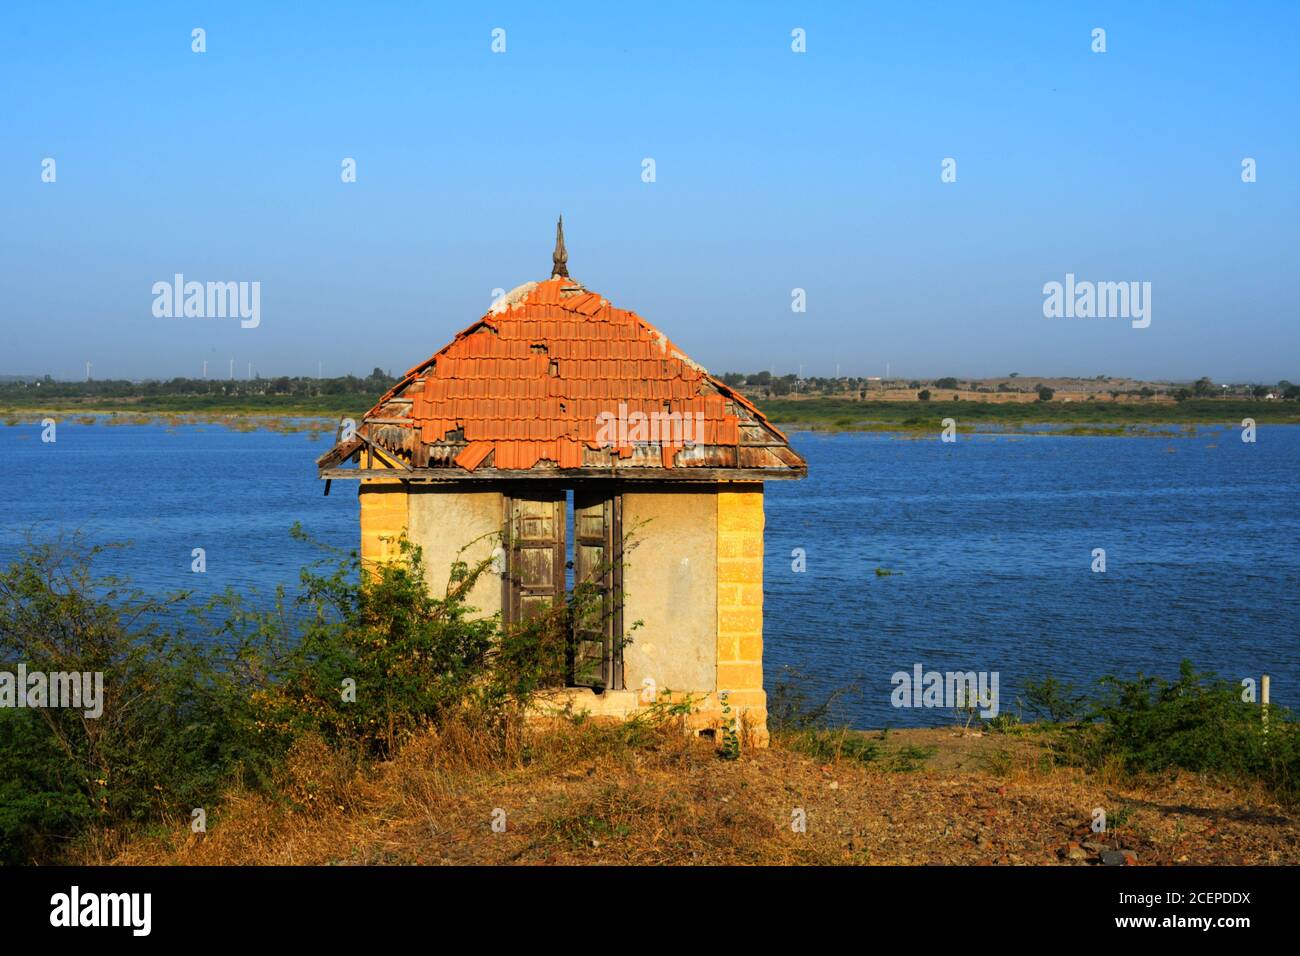 Hut on banks of the river of India, old hut, Little old house on banks of the river at sunset in silence Stock Photo